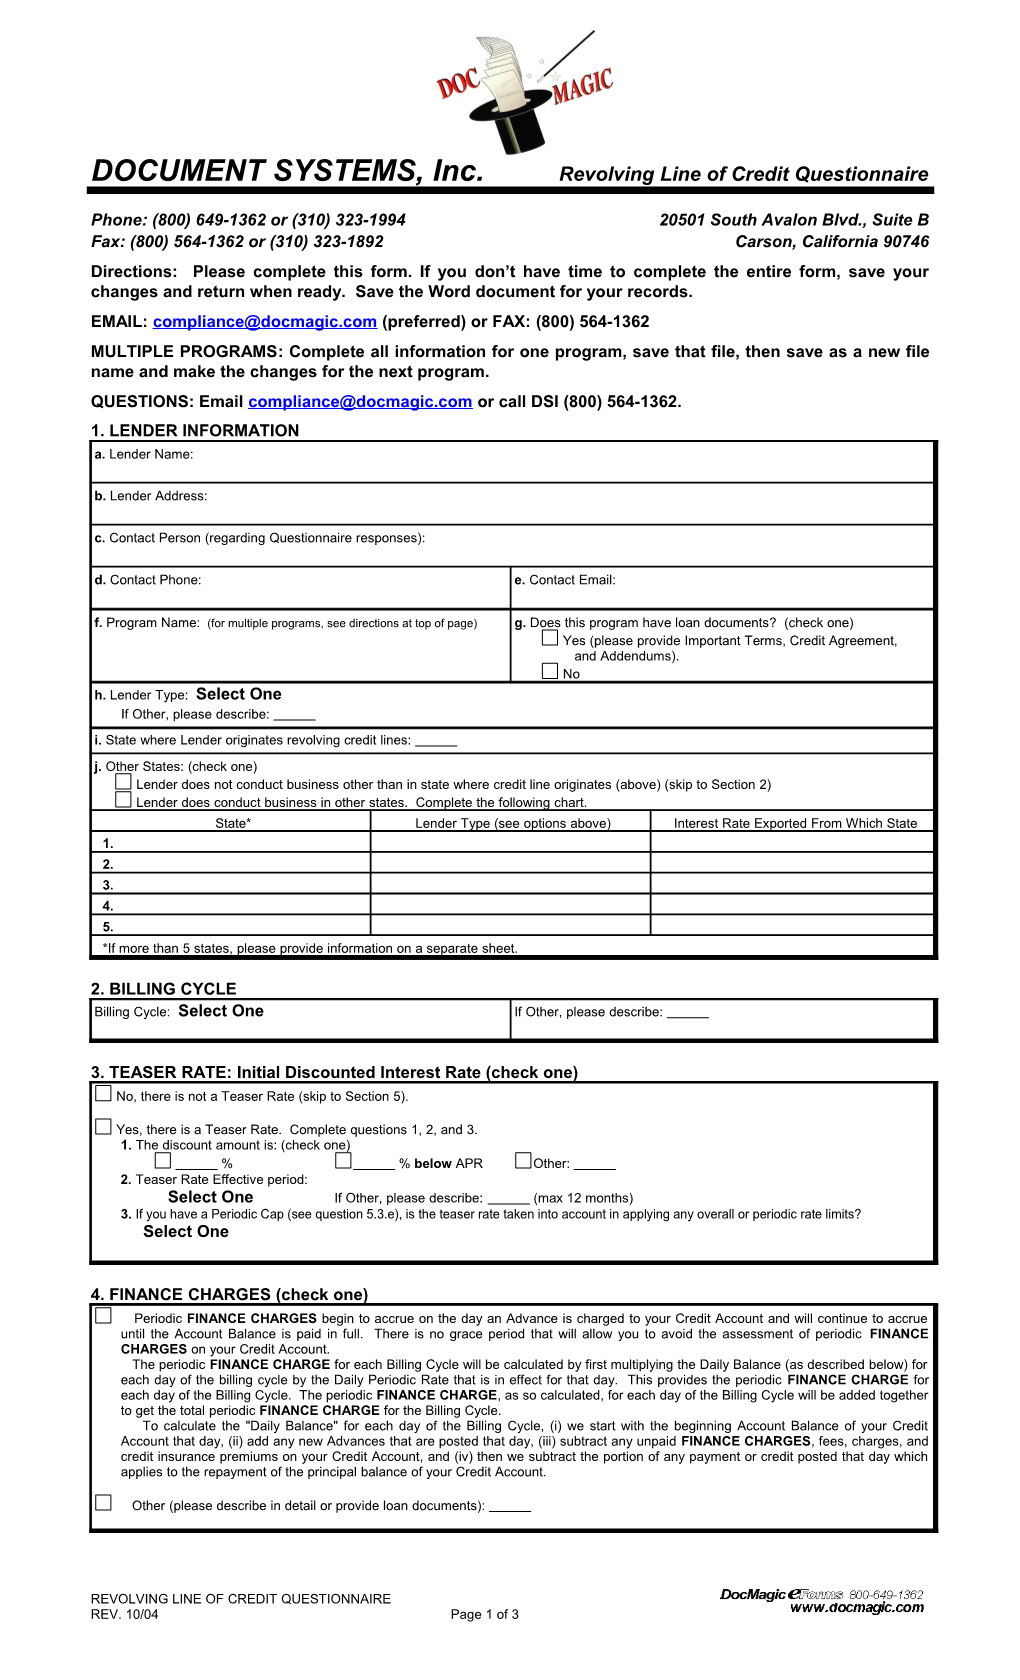 DOCUMENT SYSTEMS, Inc. Revolving Line of Credit Questionnaire